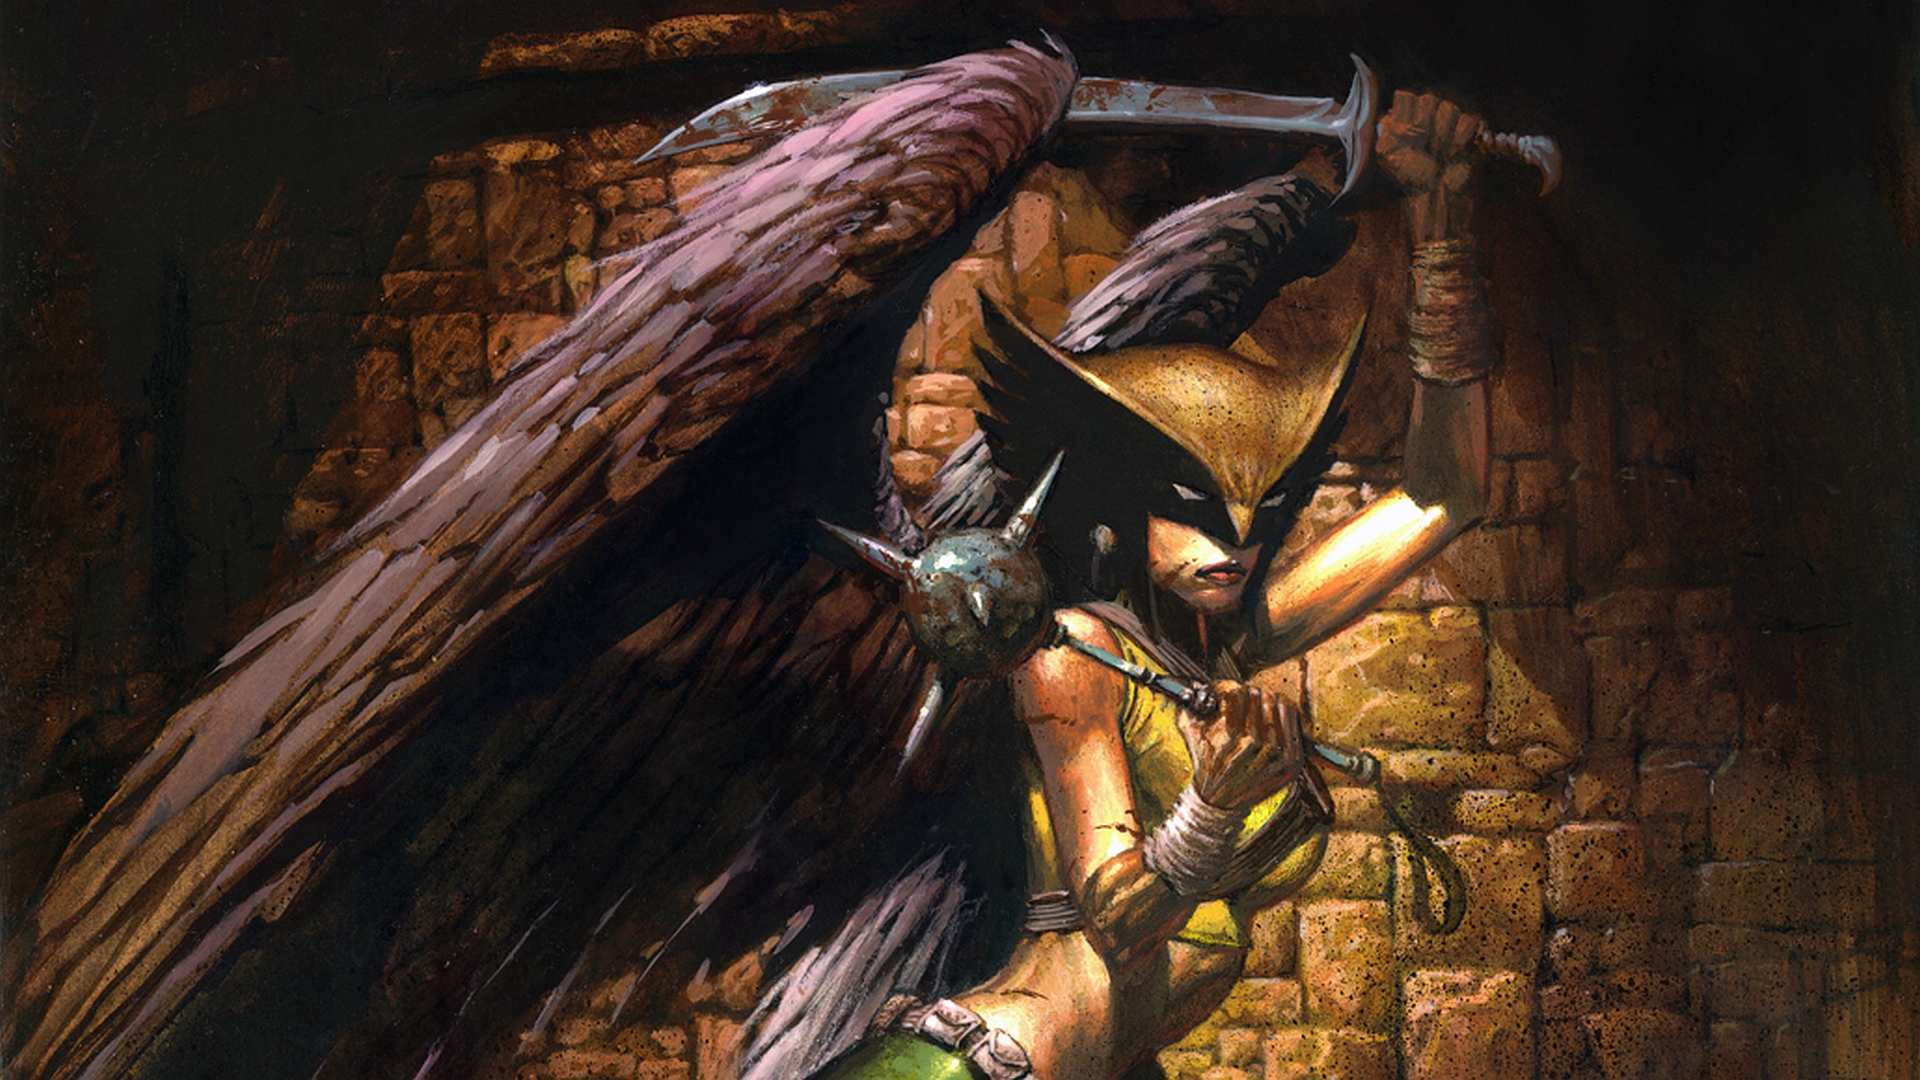 Hawkgirl in fierce battle attire wields a mace and sword, donning a signature helmet with majestic wings - a powerful image from DC Comics.